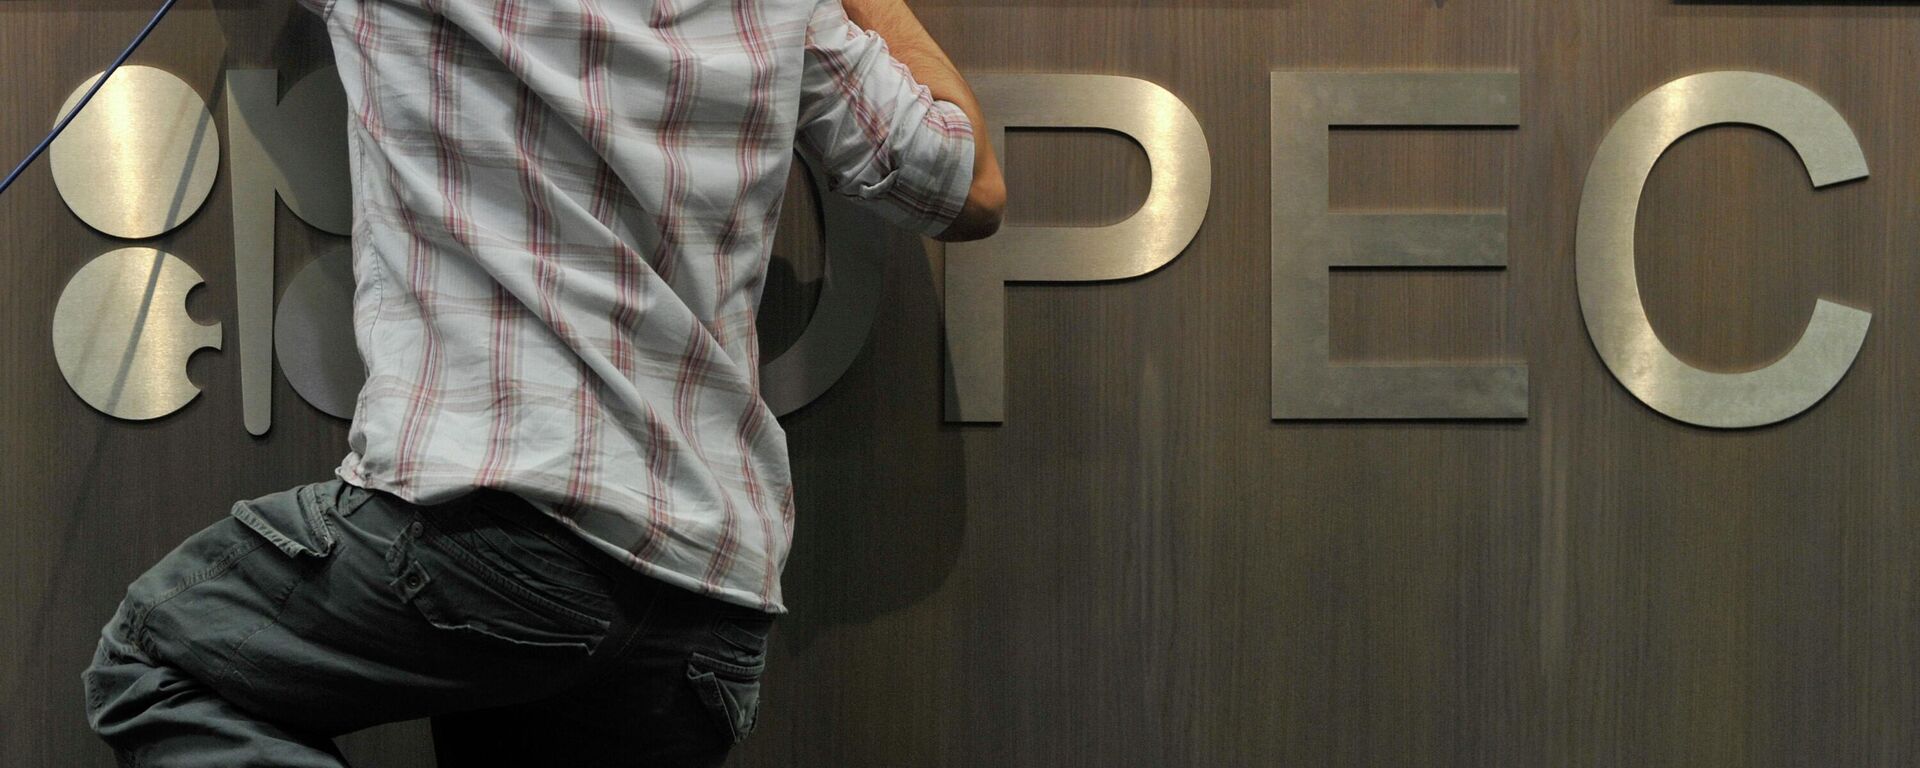 A journalist is seen on his knees in front of the logo of the Organization of the Petroleum Exporting Countries (OPEC) before a press conference after the OPEC meeting in Vienna, Austria, Wednesday, June 8, 2011 - Sputnik International, 1920, 02.06.2022